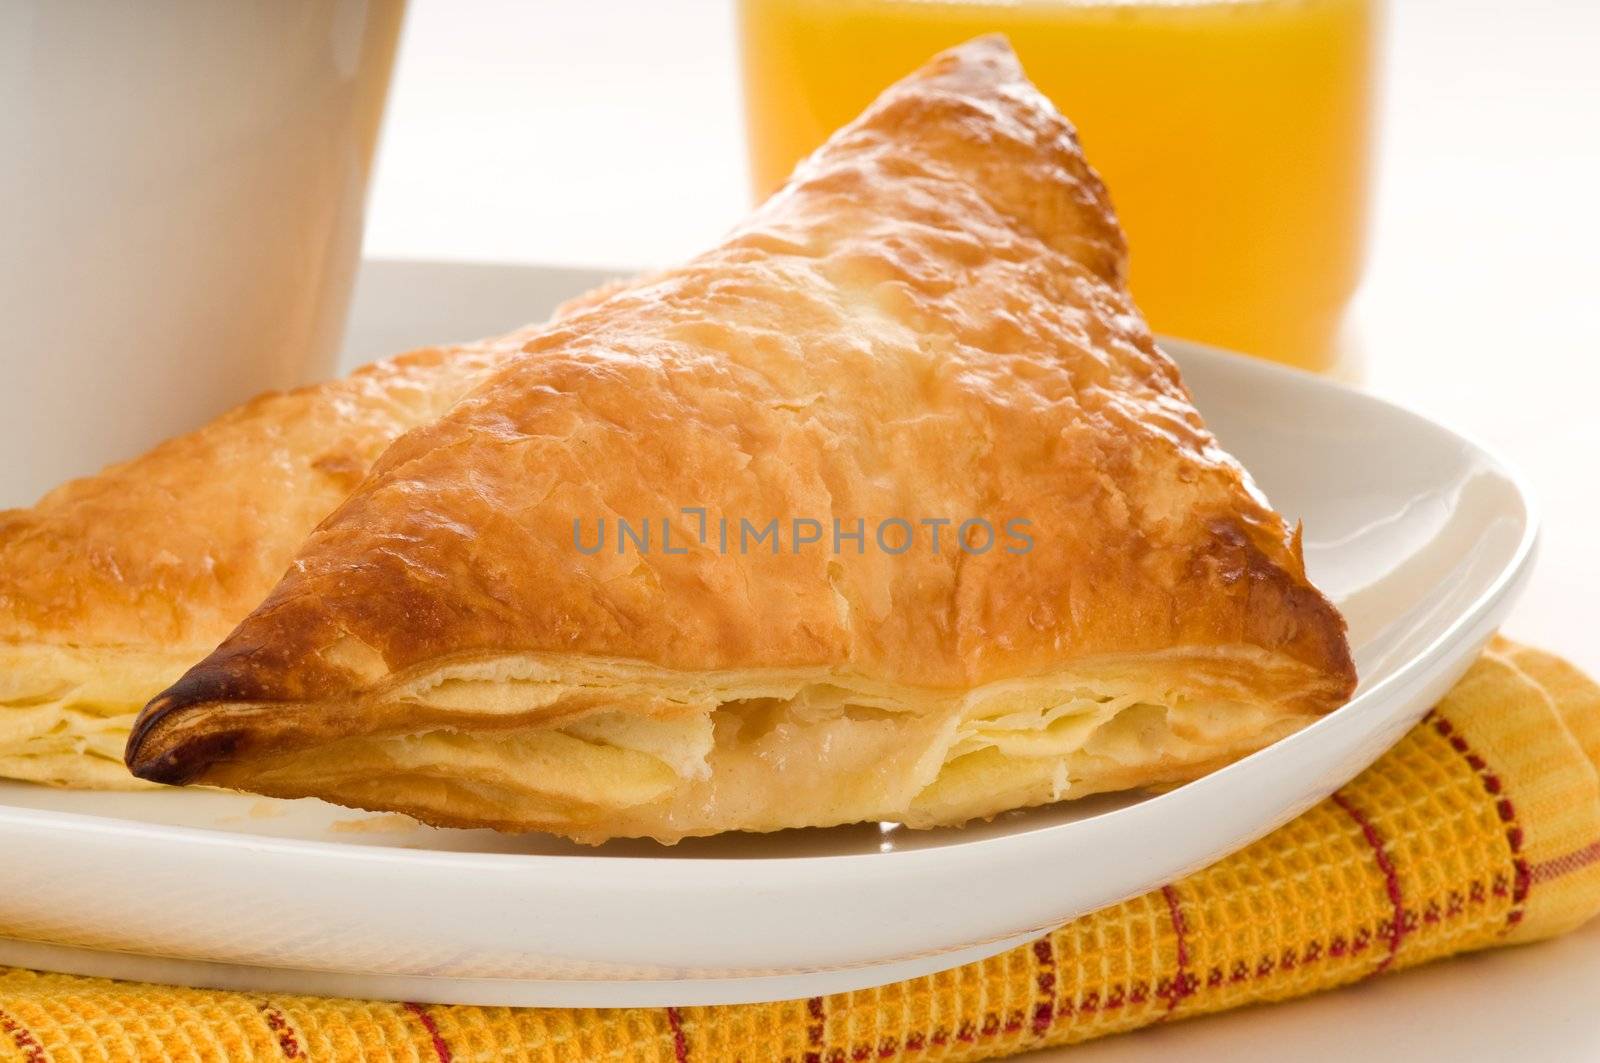 Fresh baked apple turnover on a plate.